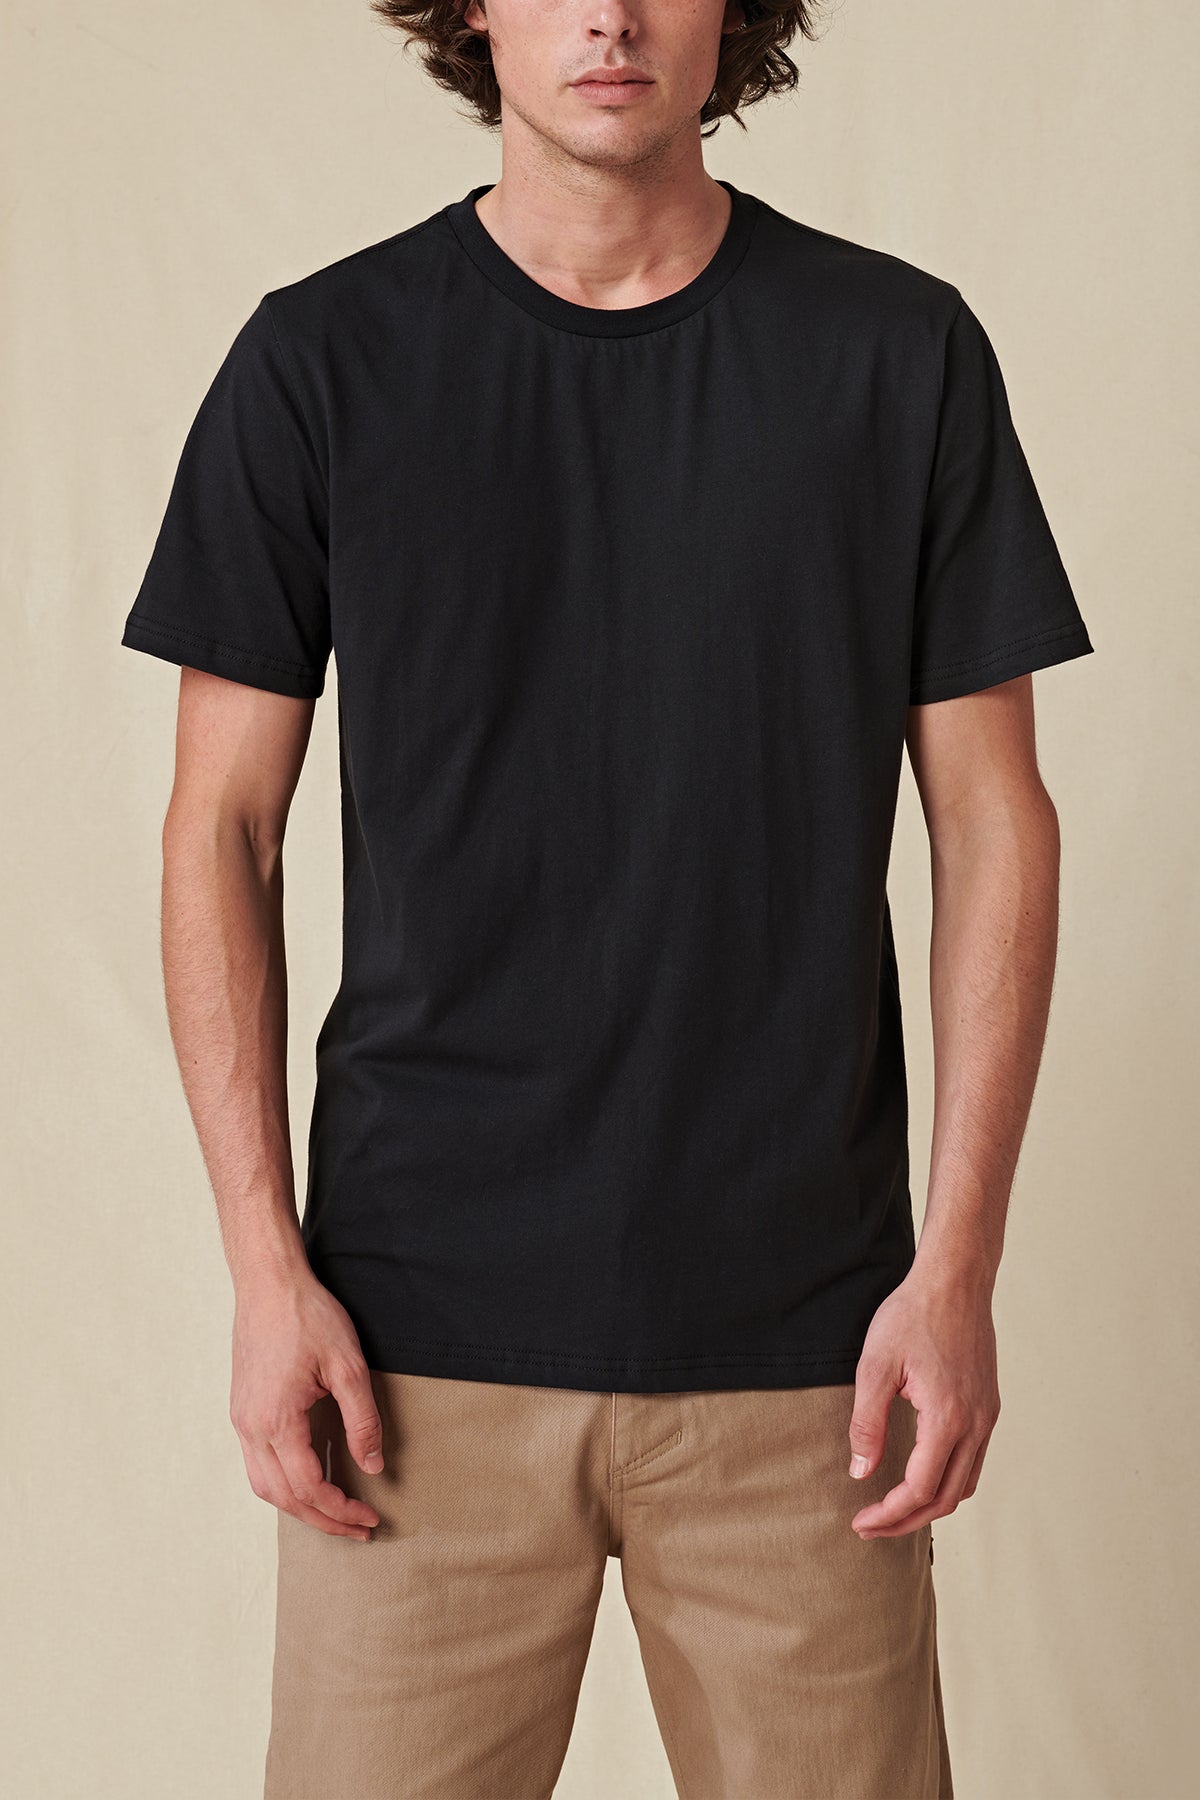 front view of Black Globe Brand tee